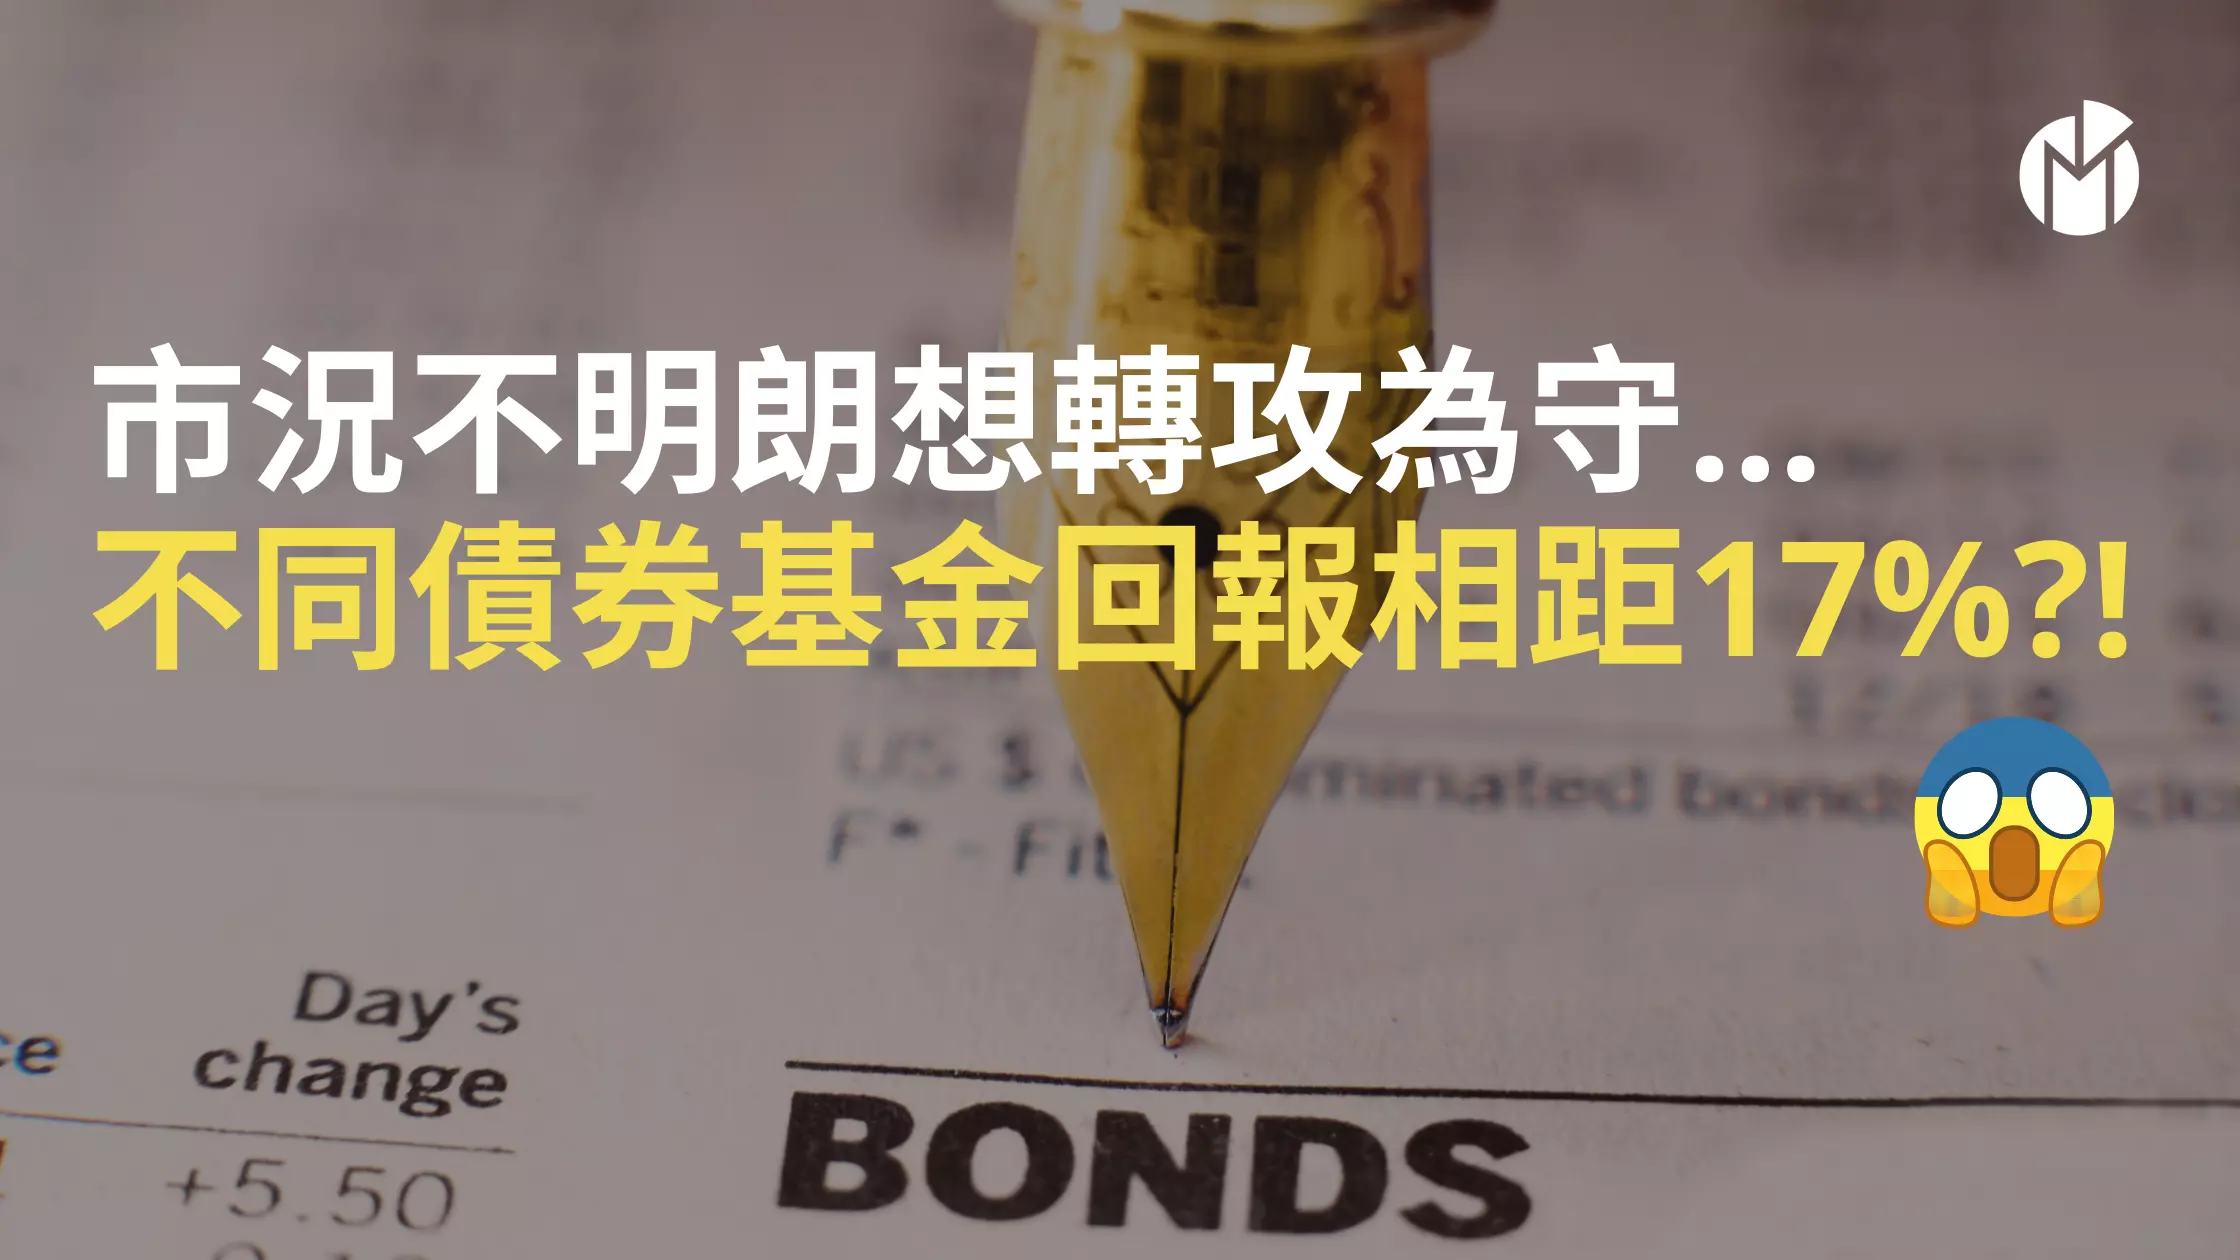 The difference of the bond MPF returns can be as big as 17%